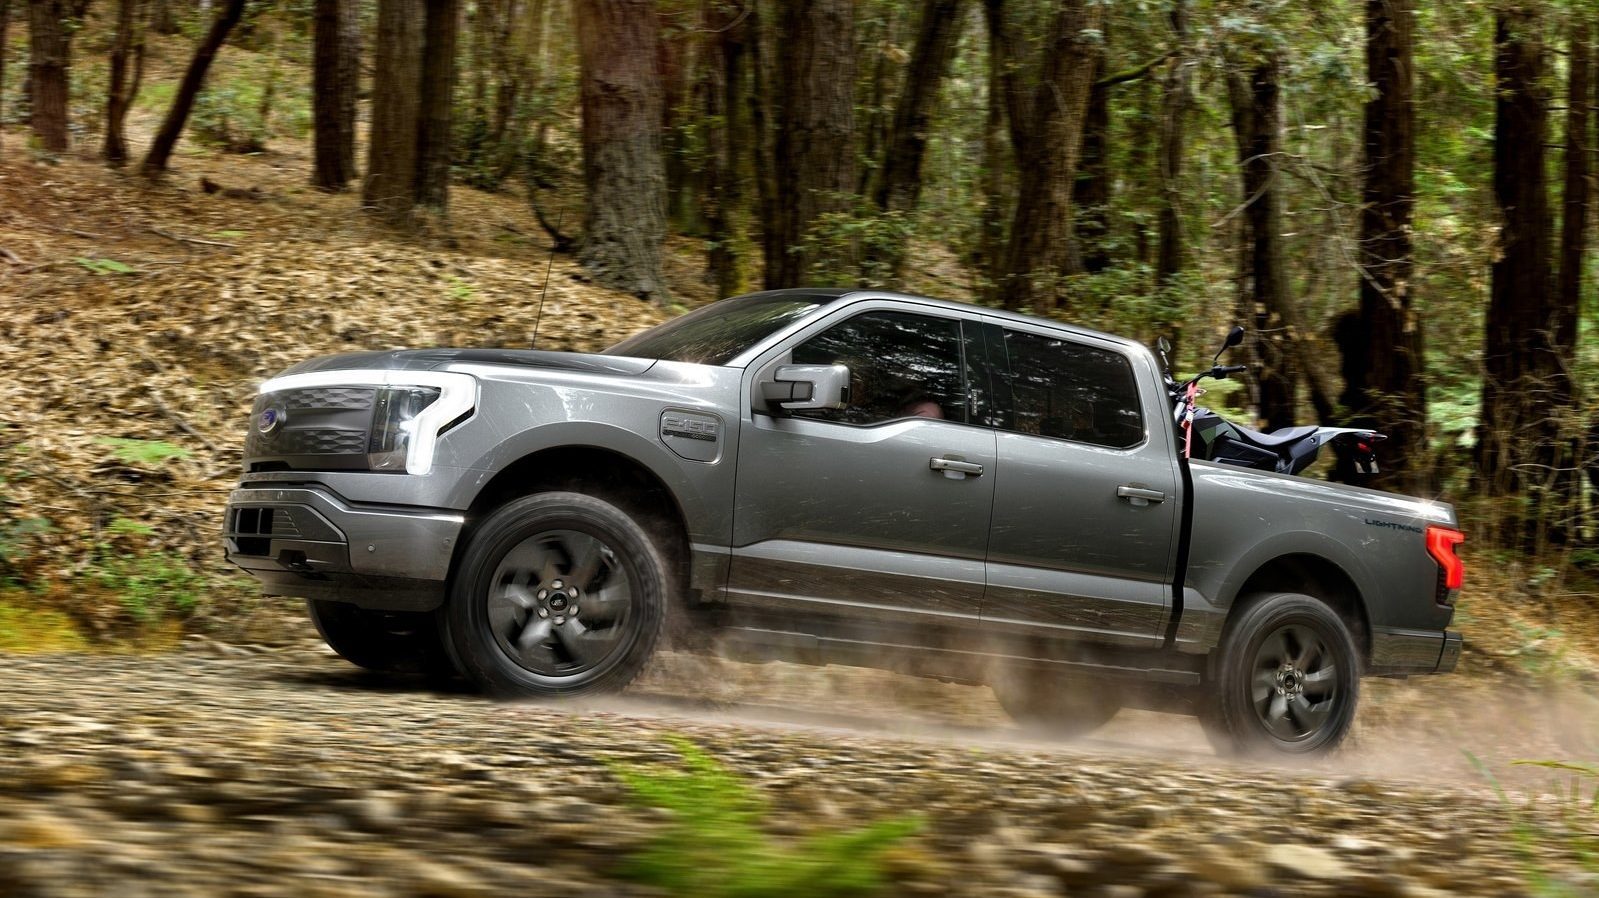 4x4 Double Cab Limited - Limited TRD Off Road